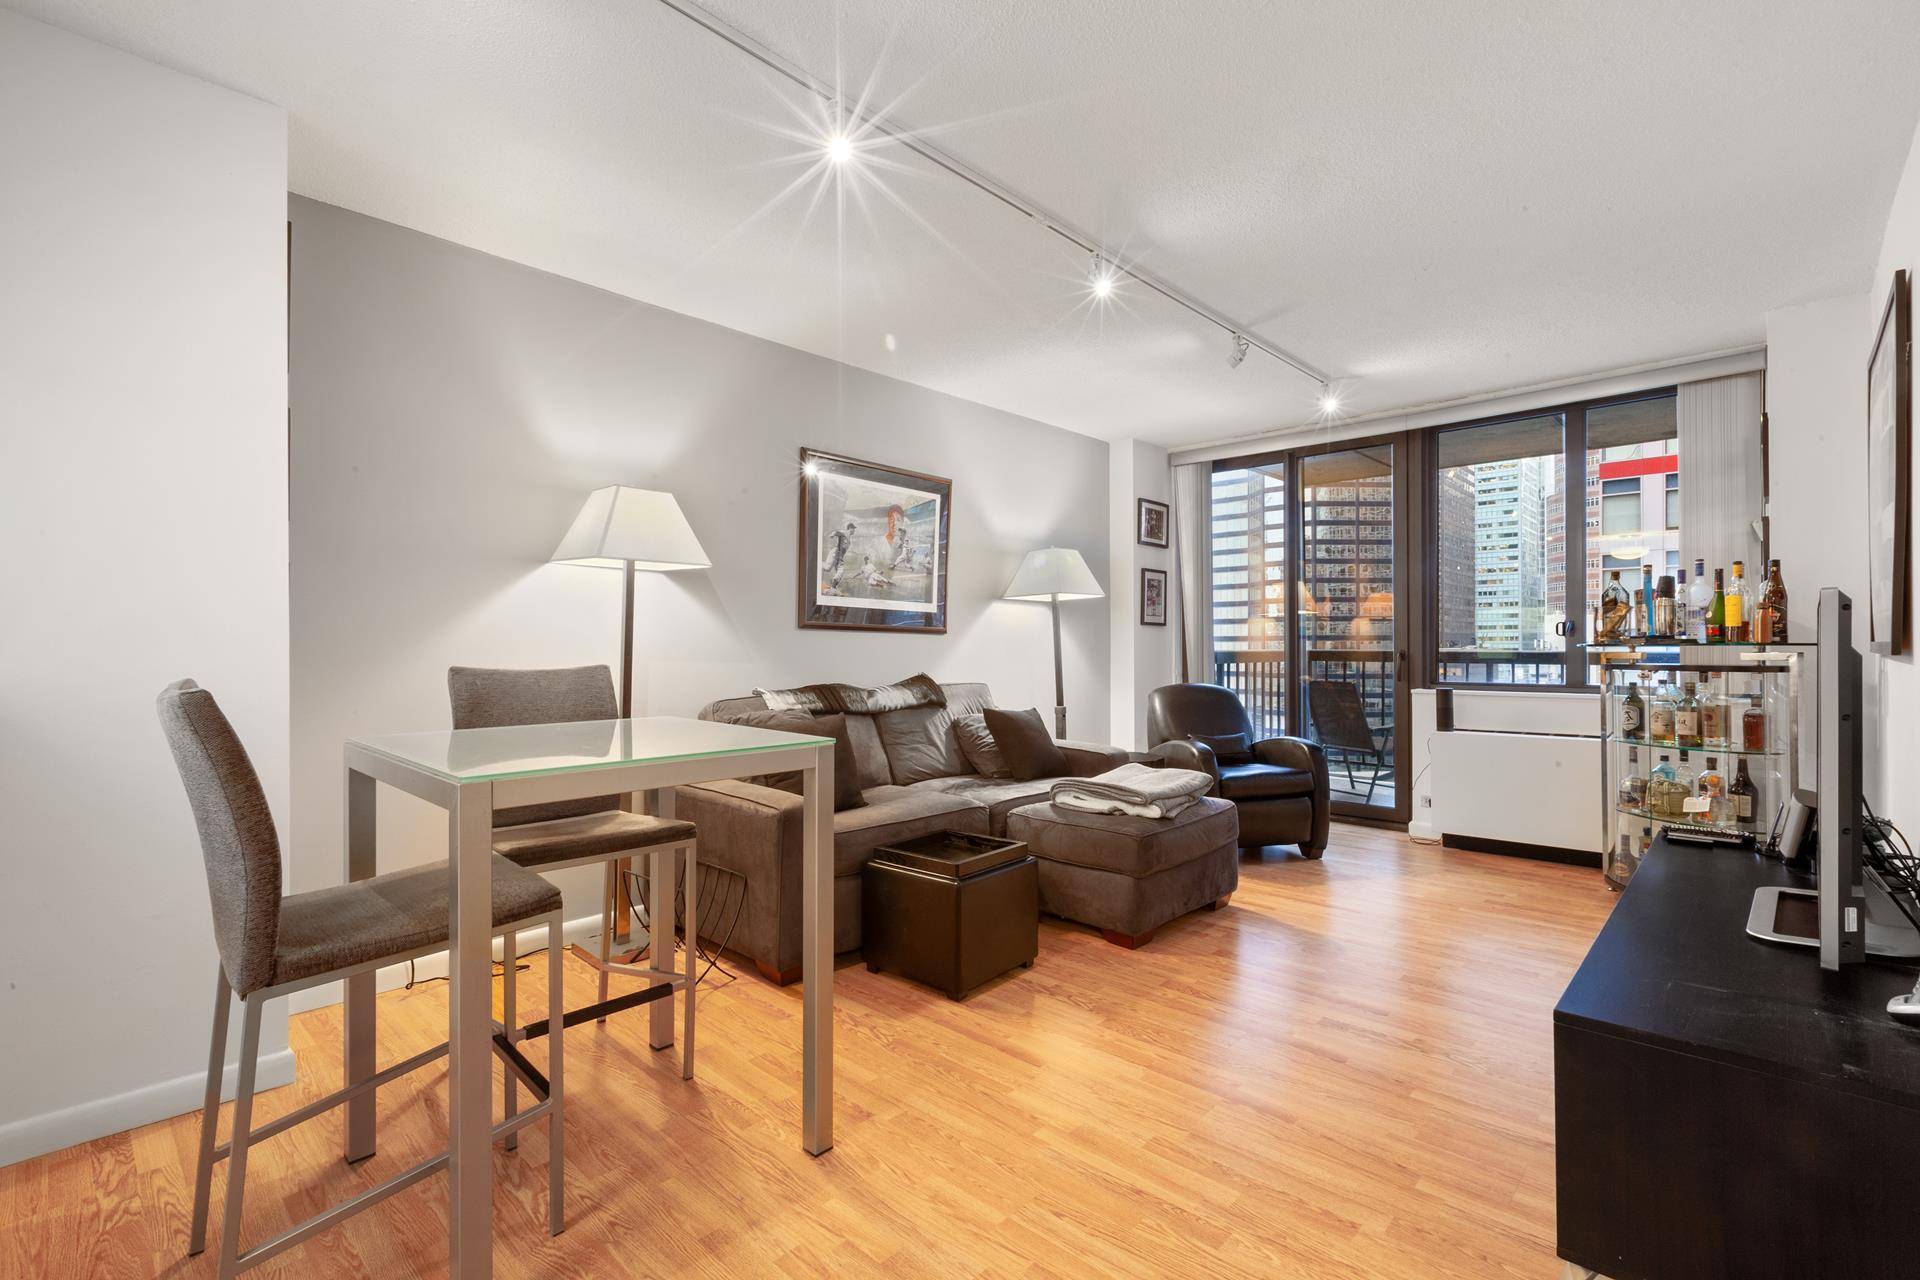 Spacious one bedroom apartment with a private balcony overlooking the city on the 16th floor of a full service co op in Midtown East.